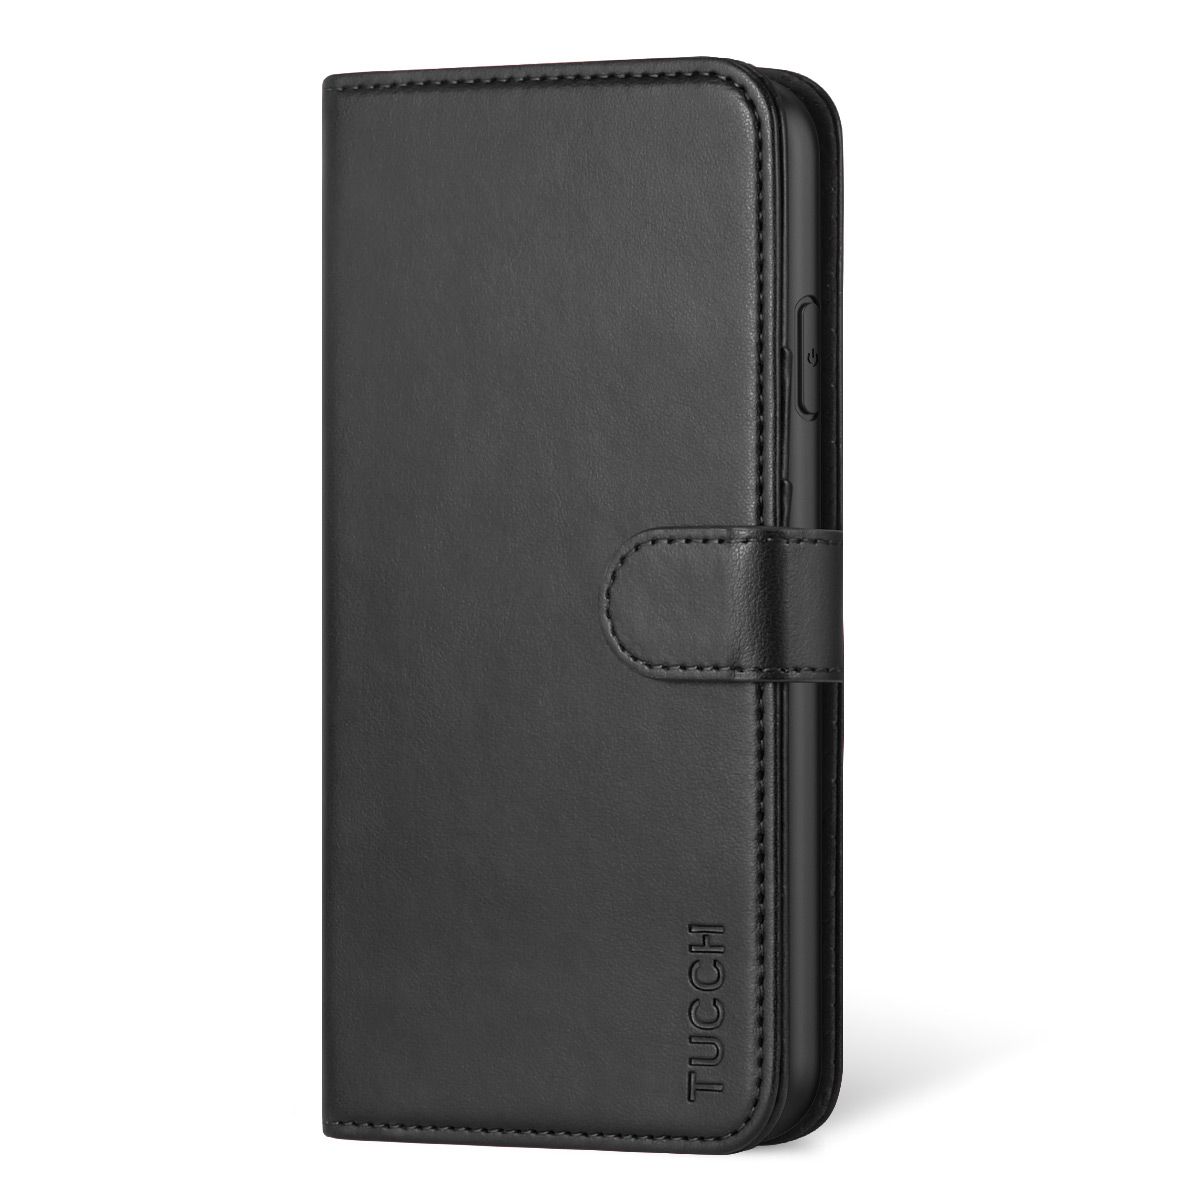 Durable Soft Wallet Cover for iPhone 11 Pro Max PU Leather Flip Case for iPhone 11 Pro Max